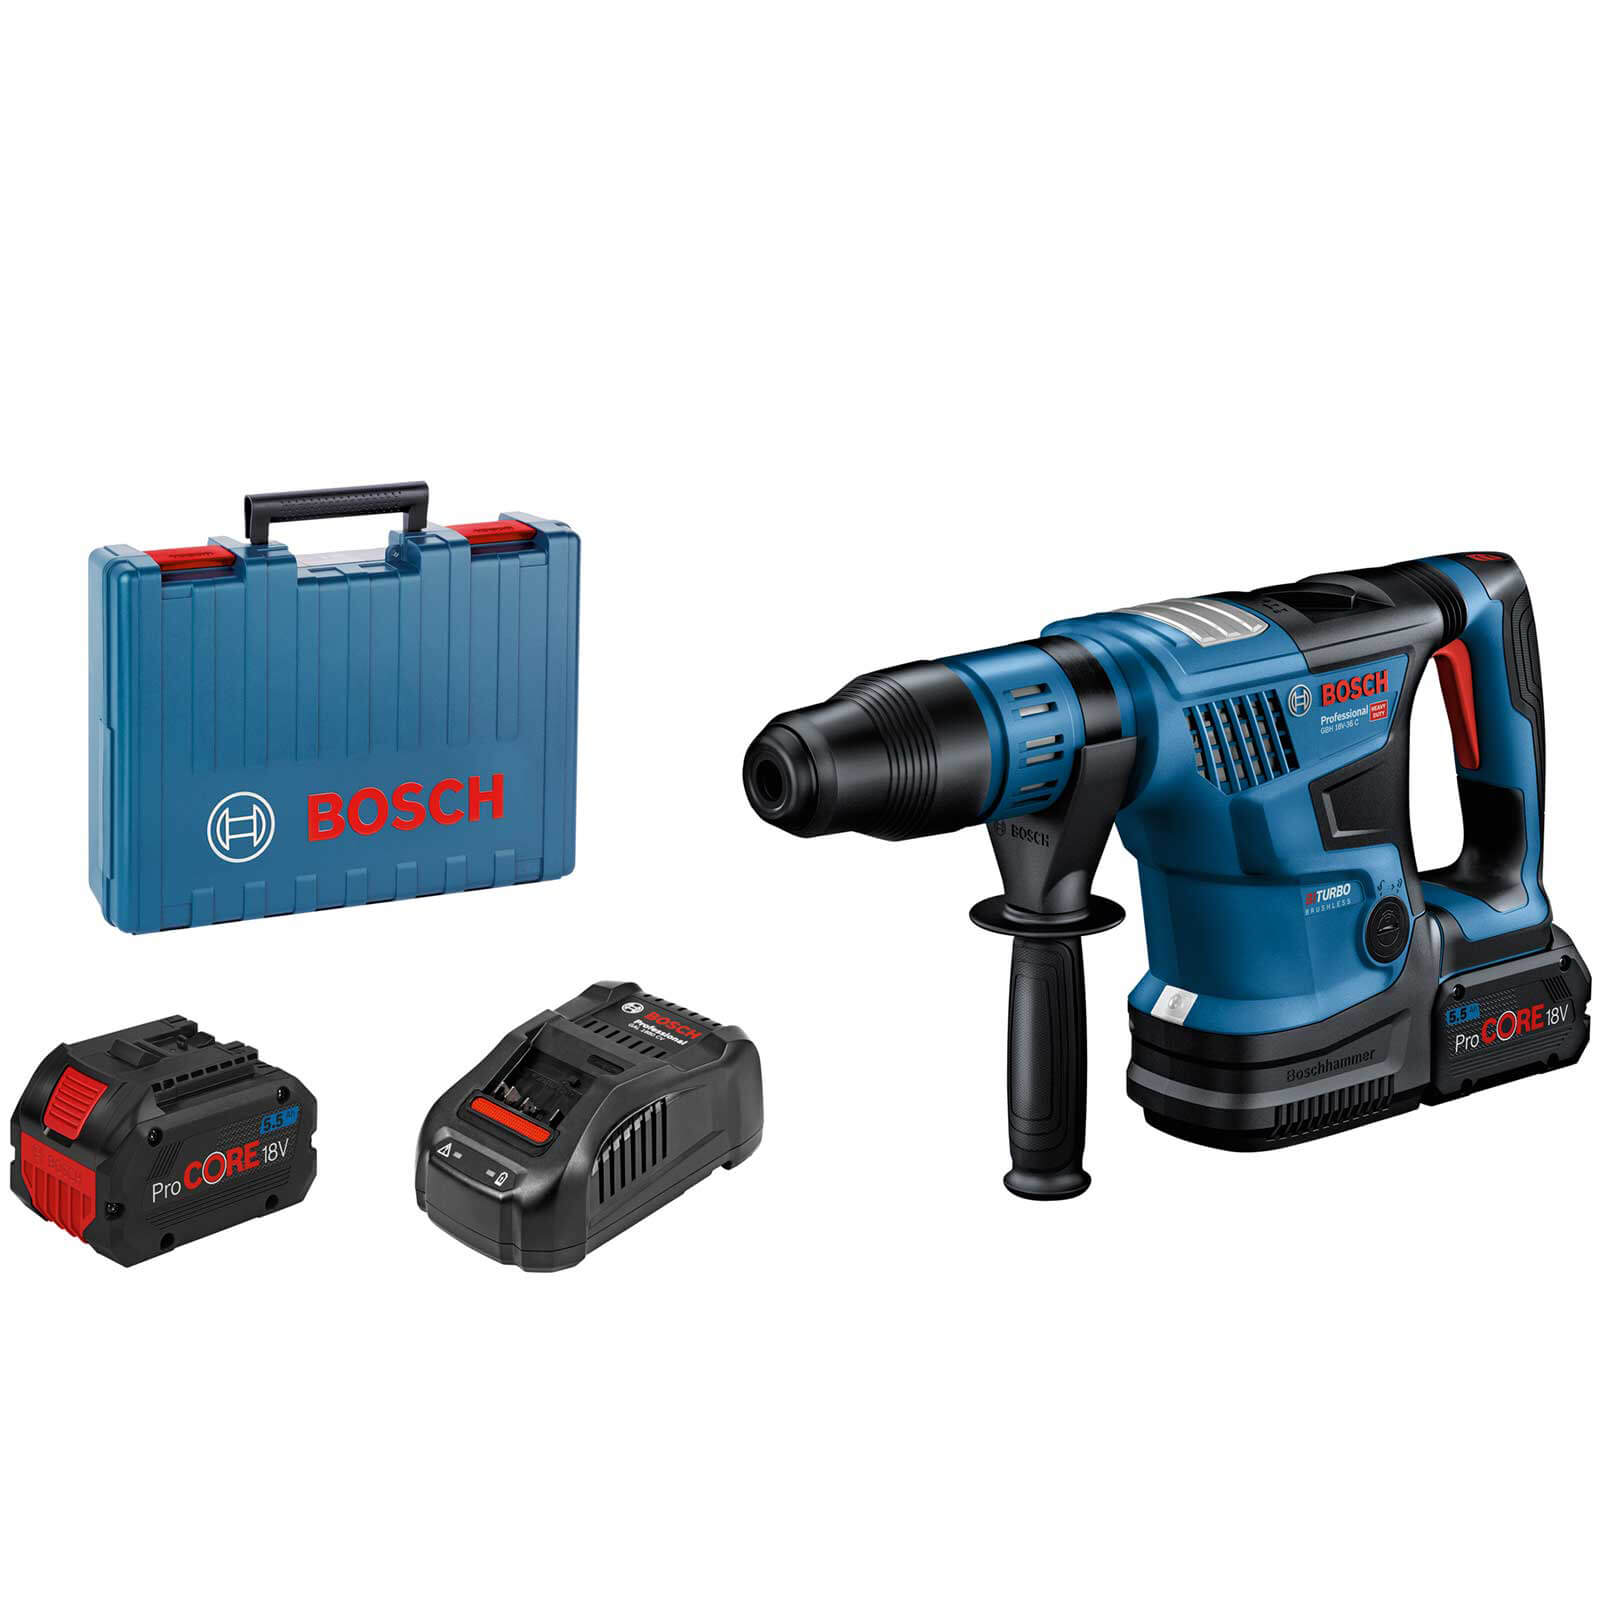 Image of Bosch GBH 18V-36 C BITURBO 18v Brushless SDS MAX Rotary Hammer Drill 2 x 5.5ah Li-ion Charger Case